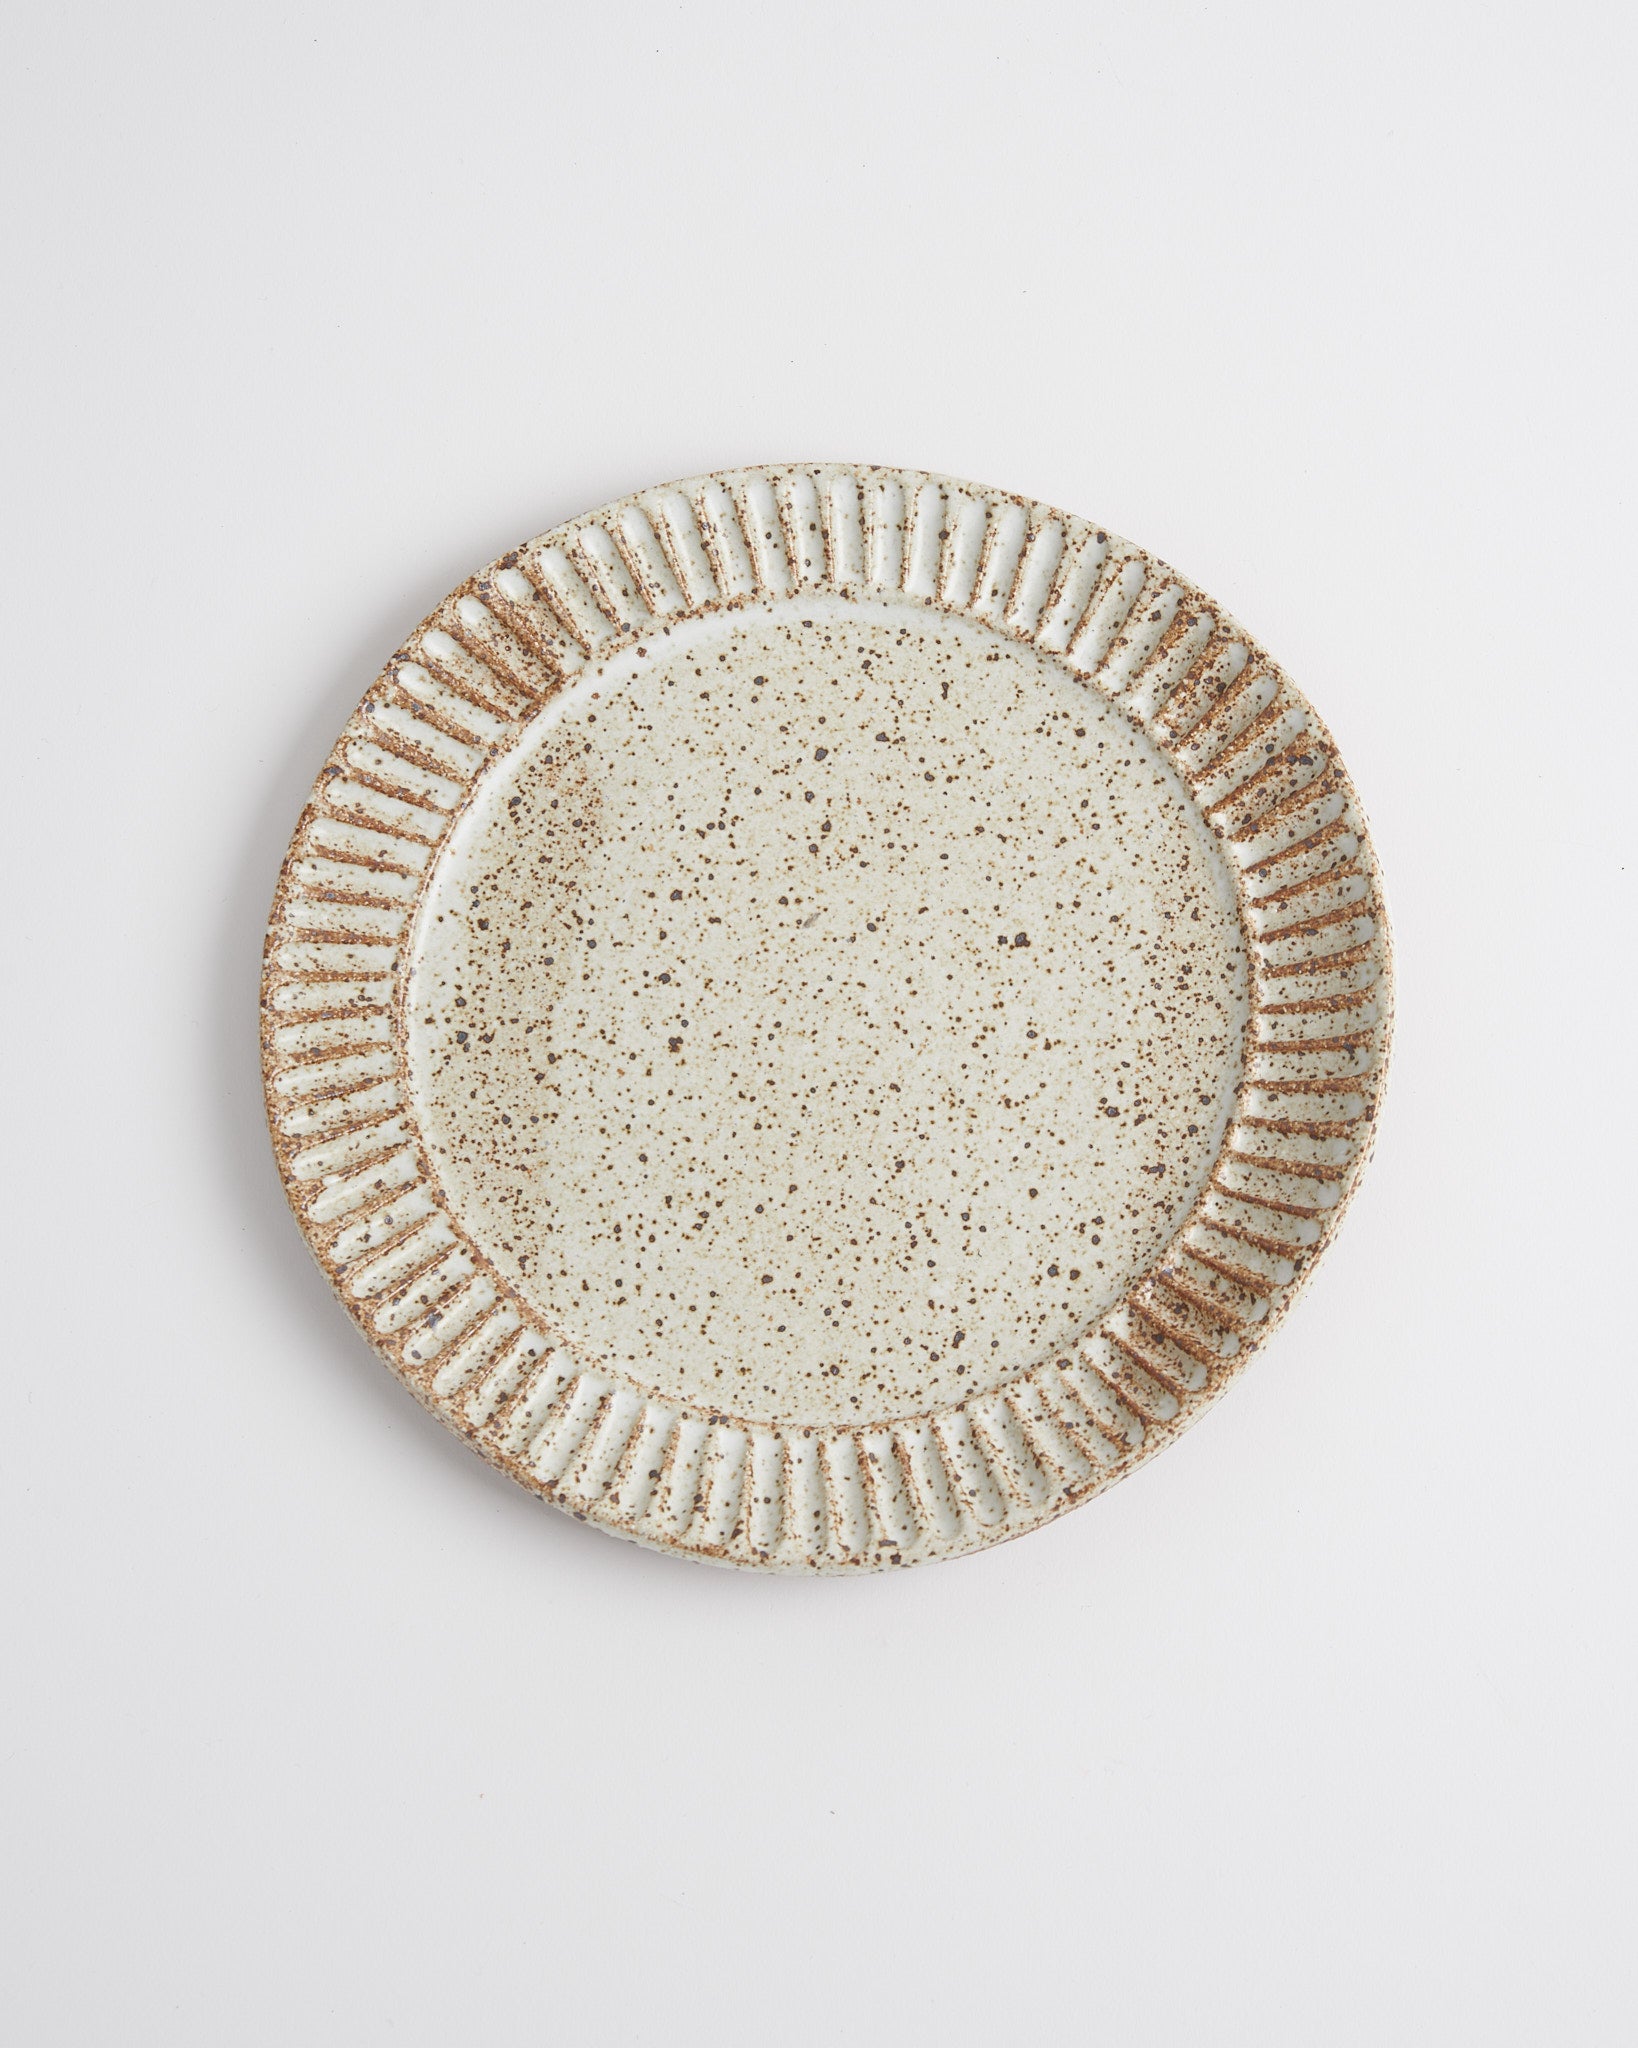 Fluted Lunch Plate in Eggshell